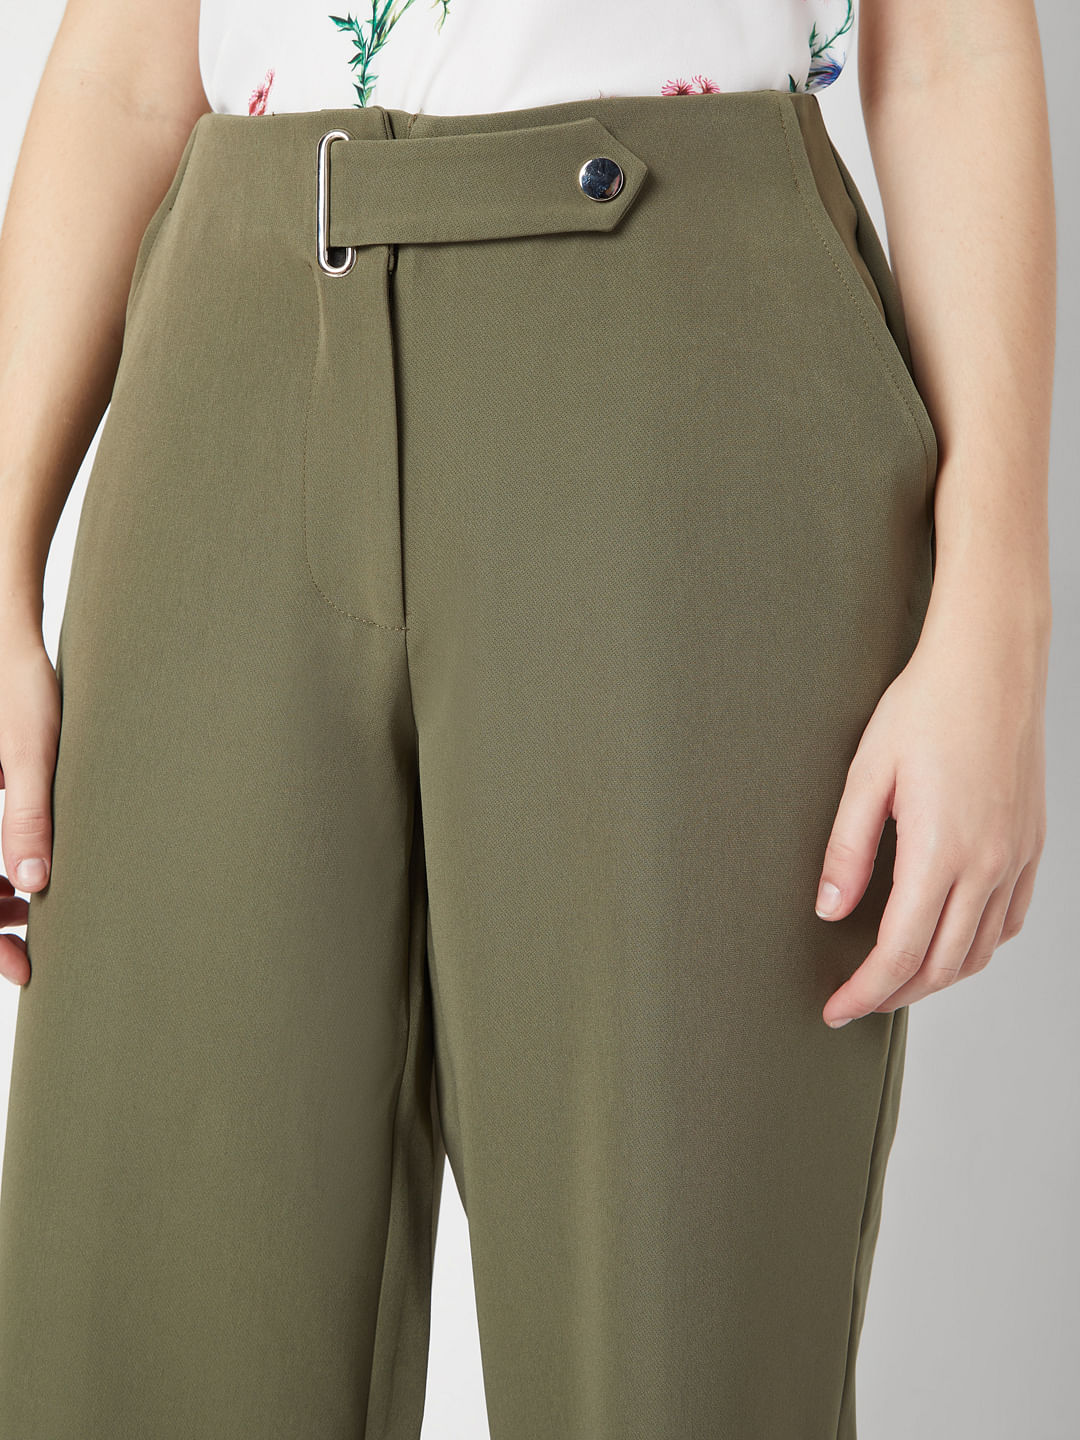 BASICS Casual Trousers  Buy BASICS Tapered Fit Forest Green Cotton Stretch  Trousers Online  Nykaa Fashion